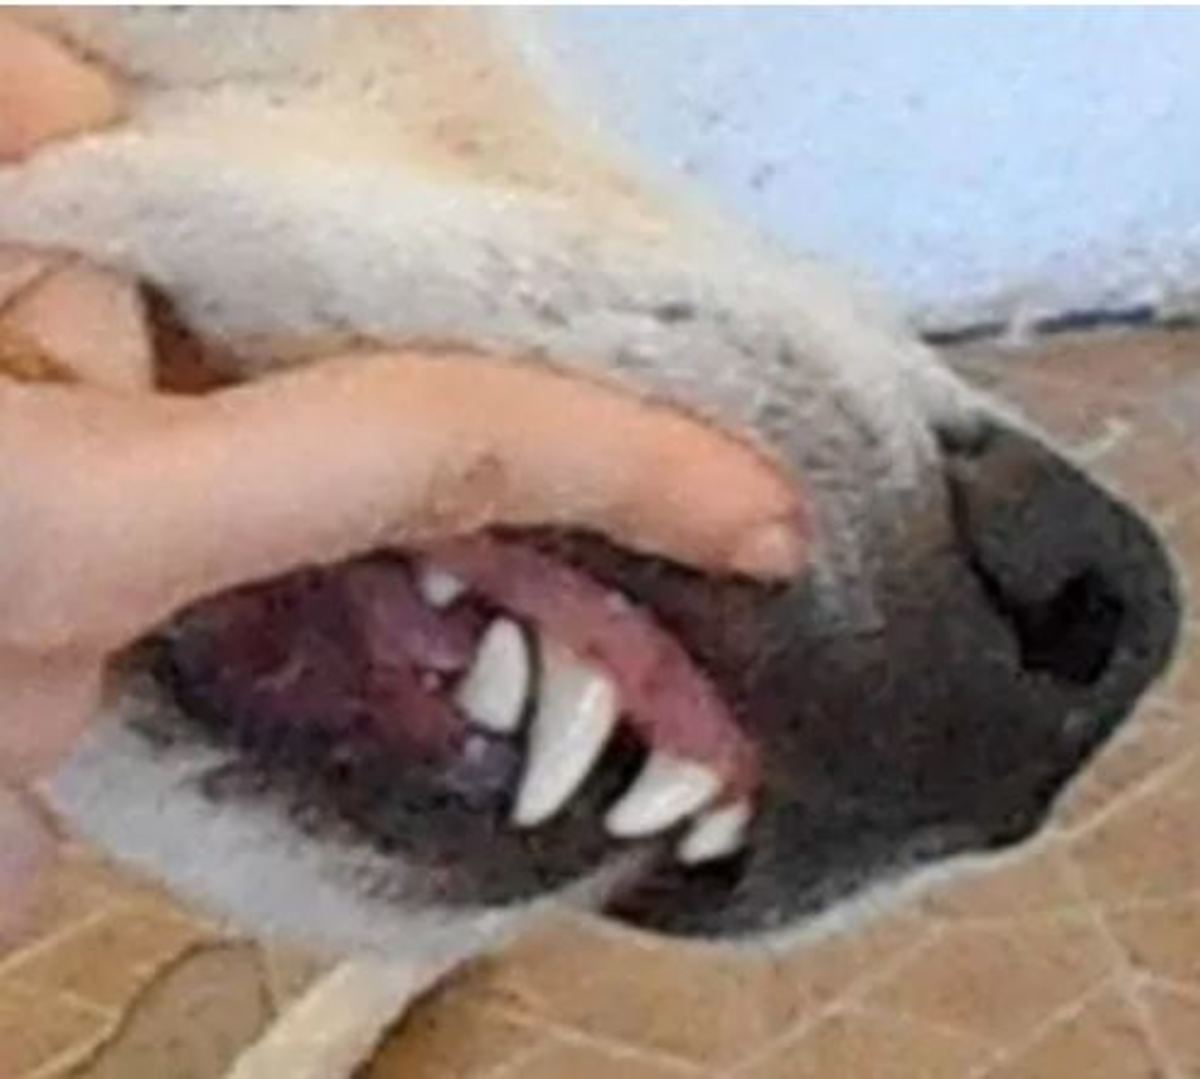  Picture of dog with overbite. All rights reserved.